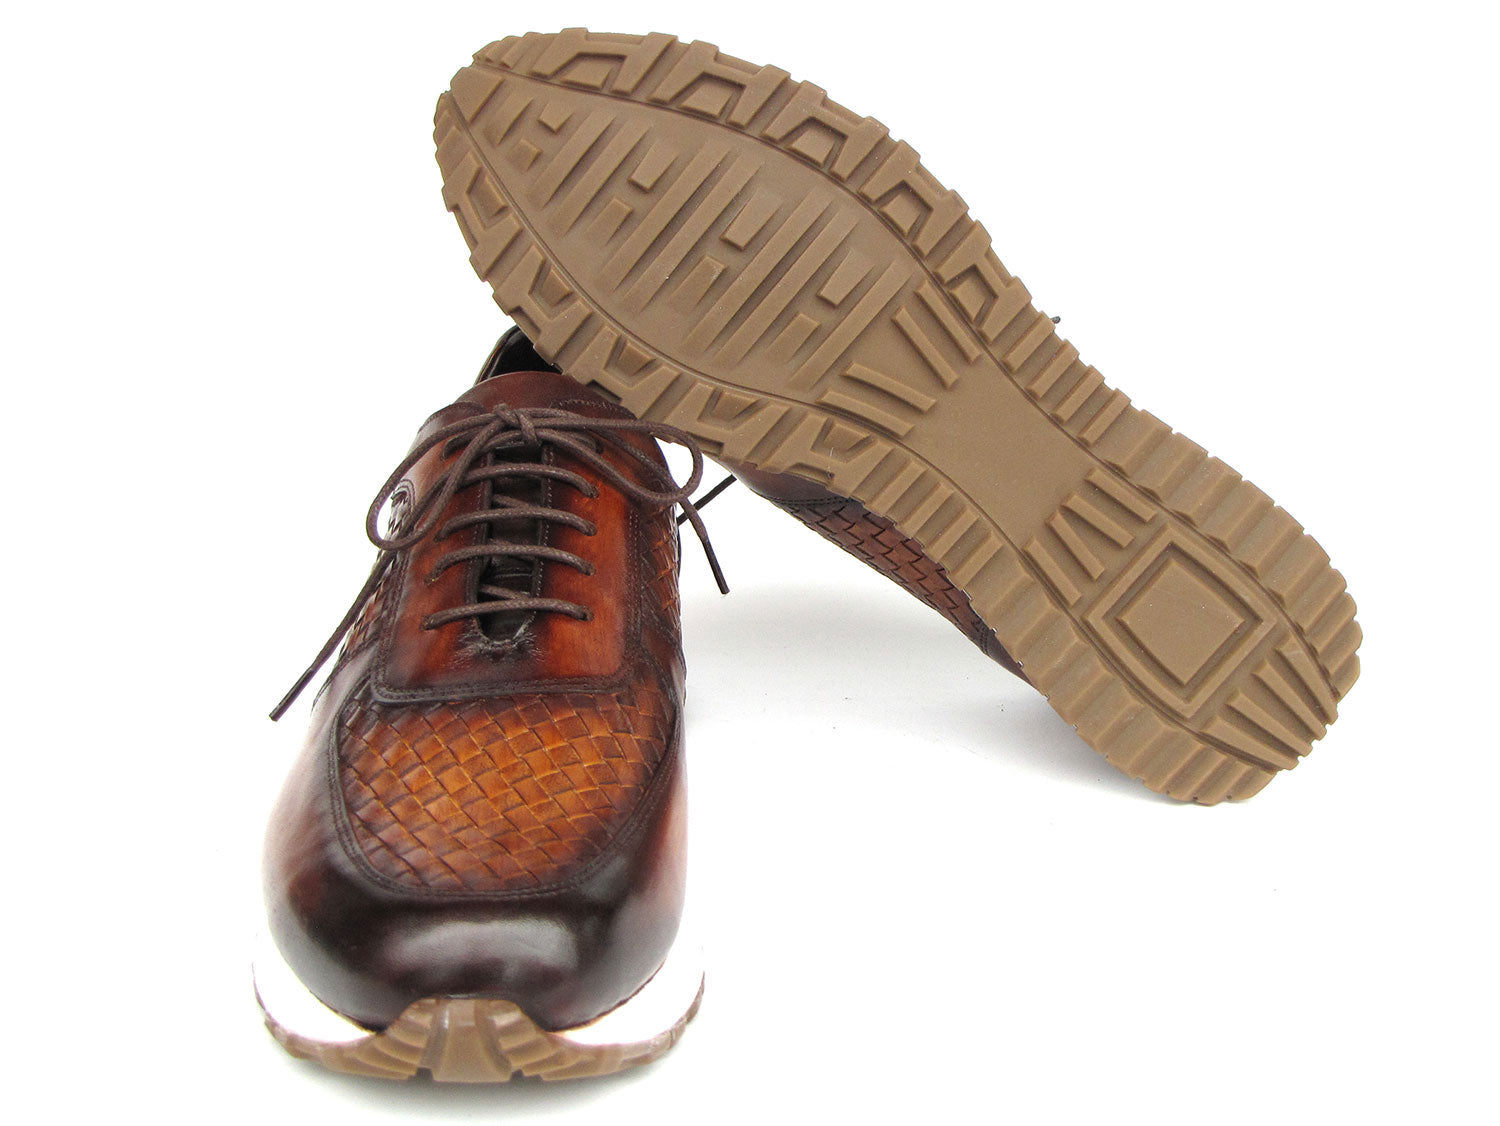 Paul Men's Brown Hand-Painted Leather Sneakers (ID#LW205 PARKMAN® Handmade Shoes